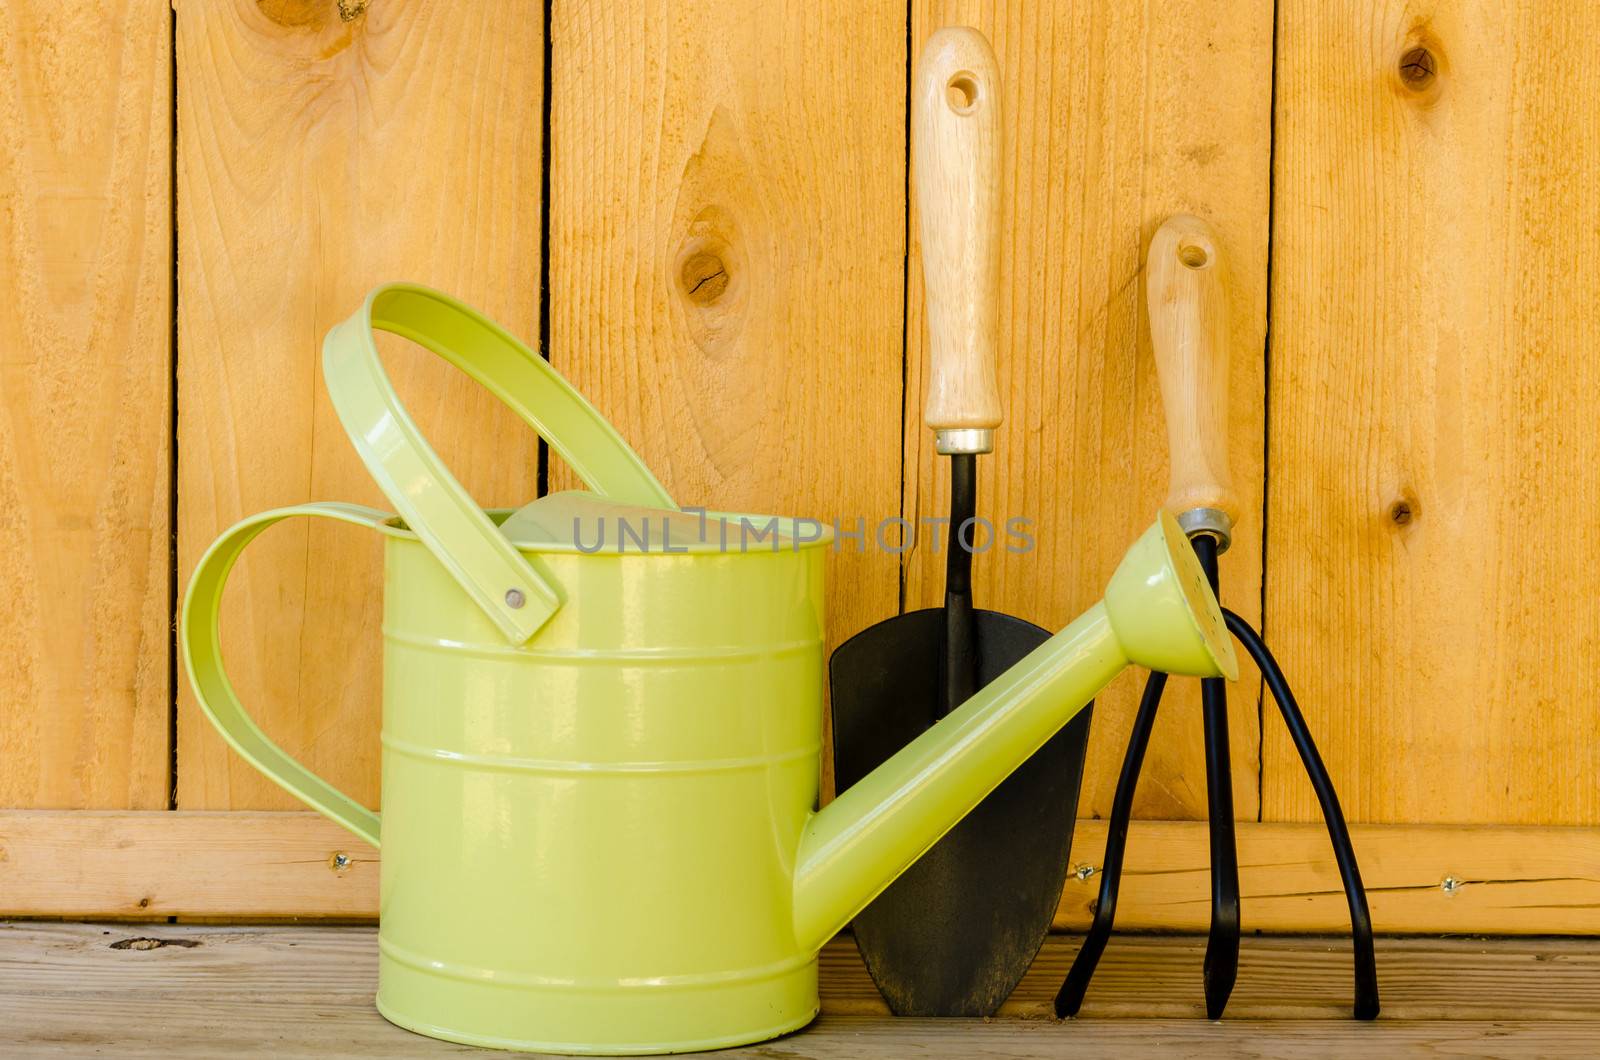 Garden tools with watering can, trowel, and hand cultivator on wood background.